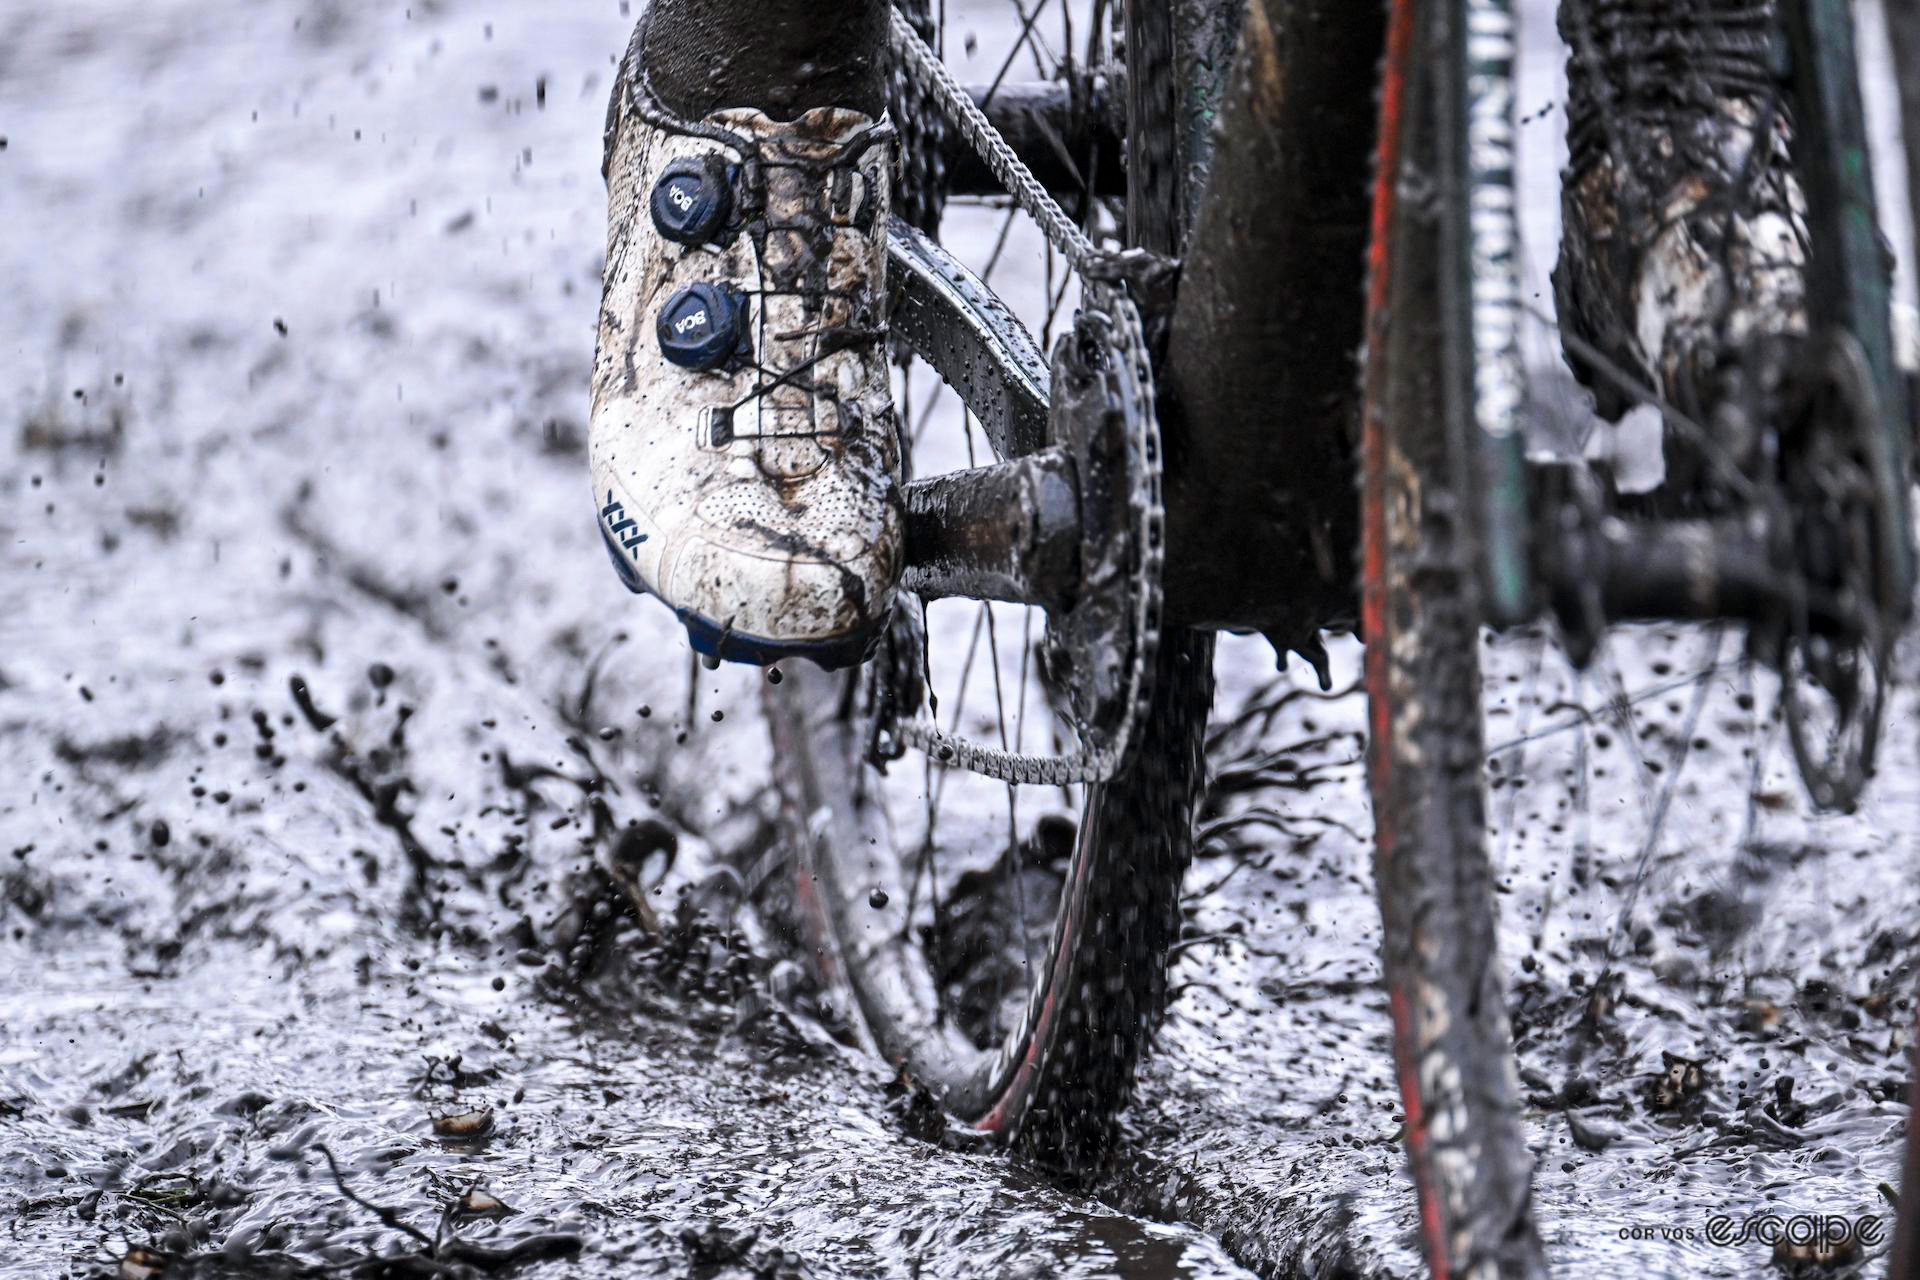 Action close-up of a very muddy cyclocross bike during Exact Cross Loenhout Azencross.